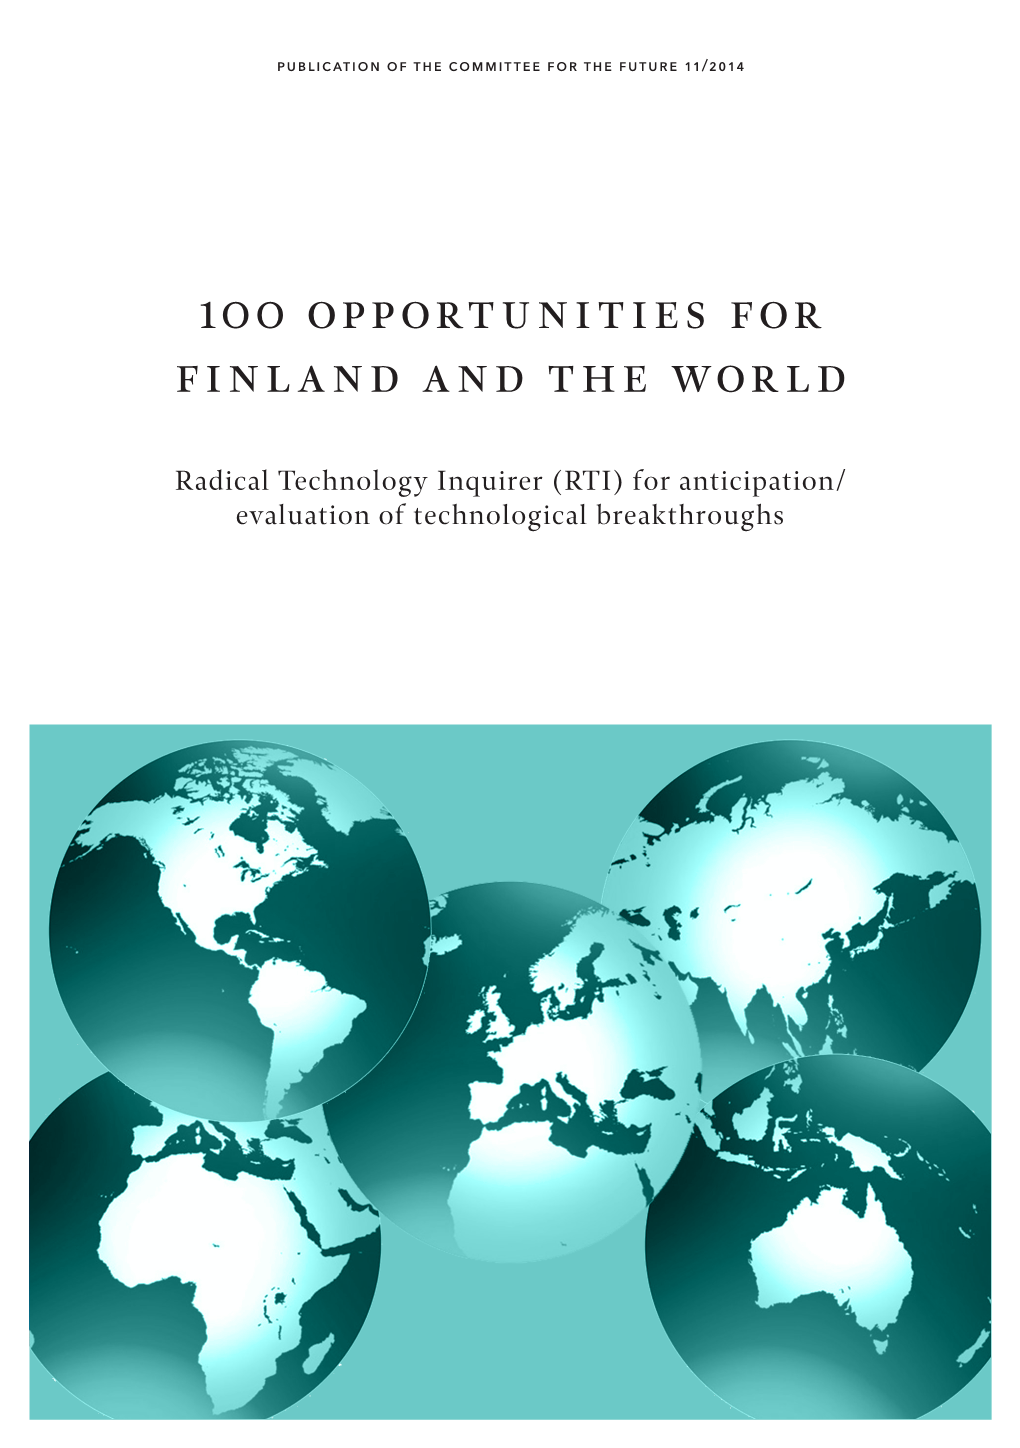 100 Opportunities for Finland and the World